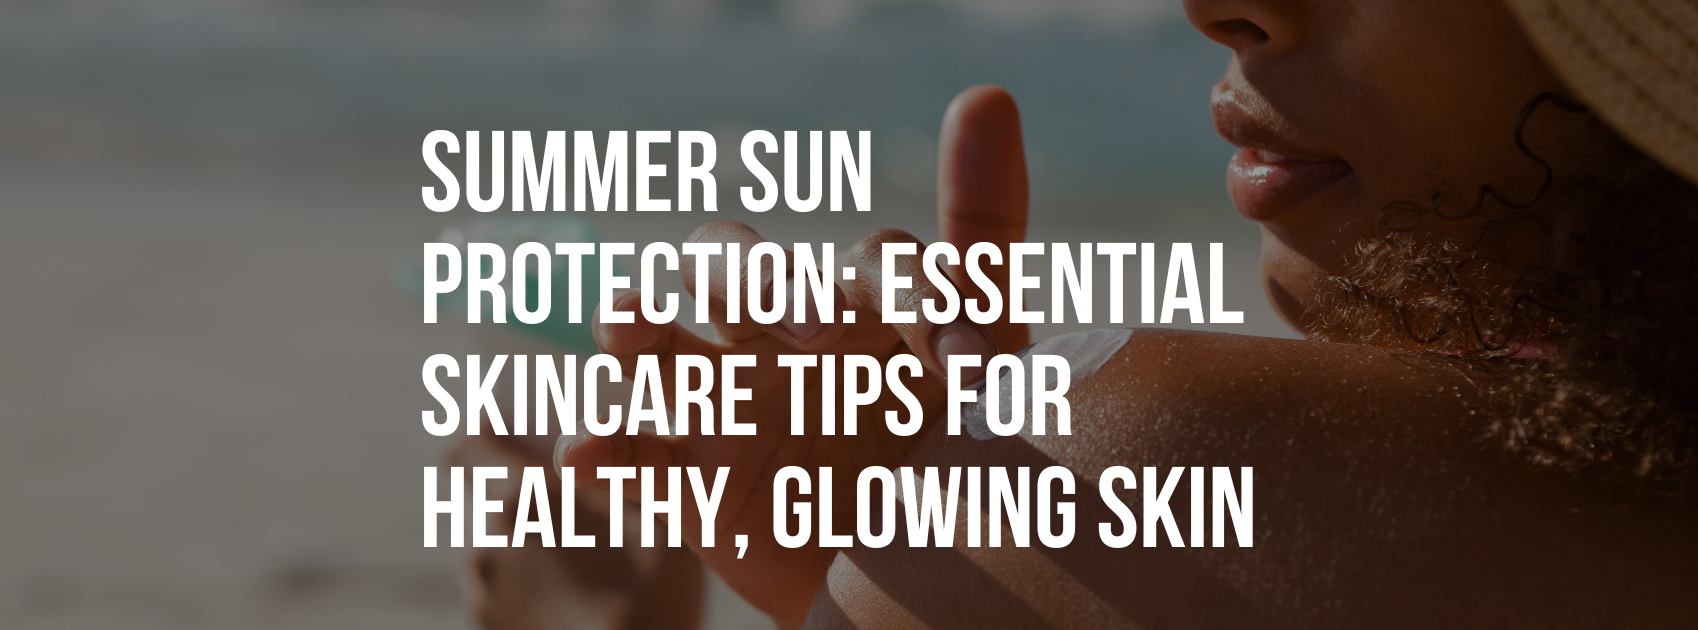 Summer Sun Protection: Essential Skincare Tips for Healthy, Glowing Skin